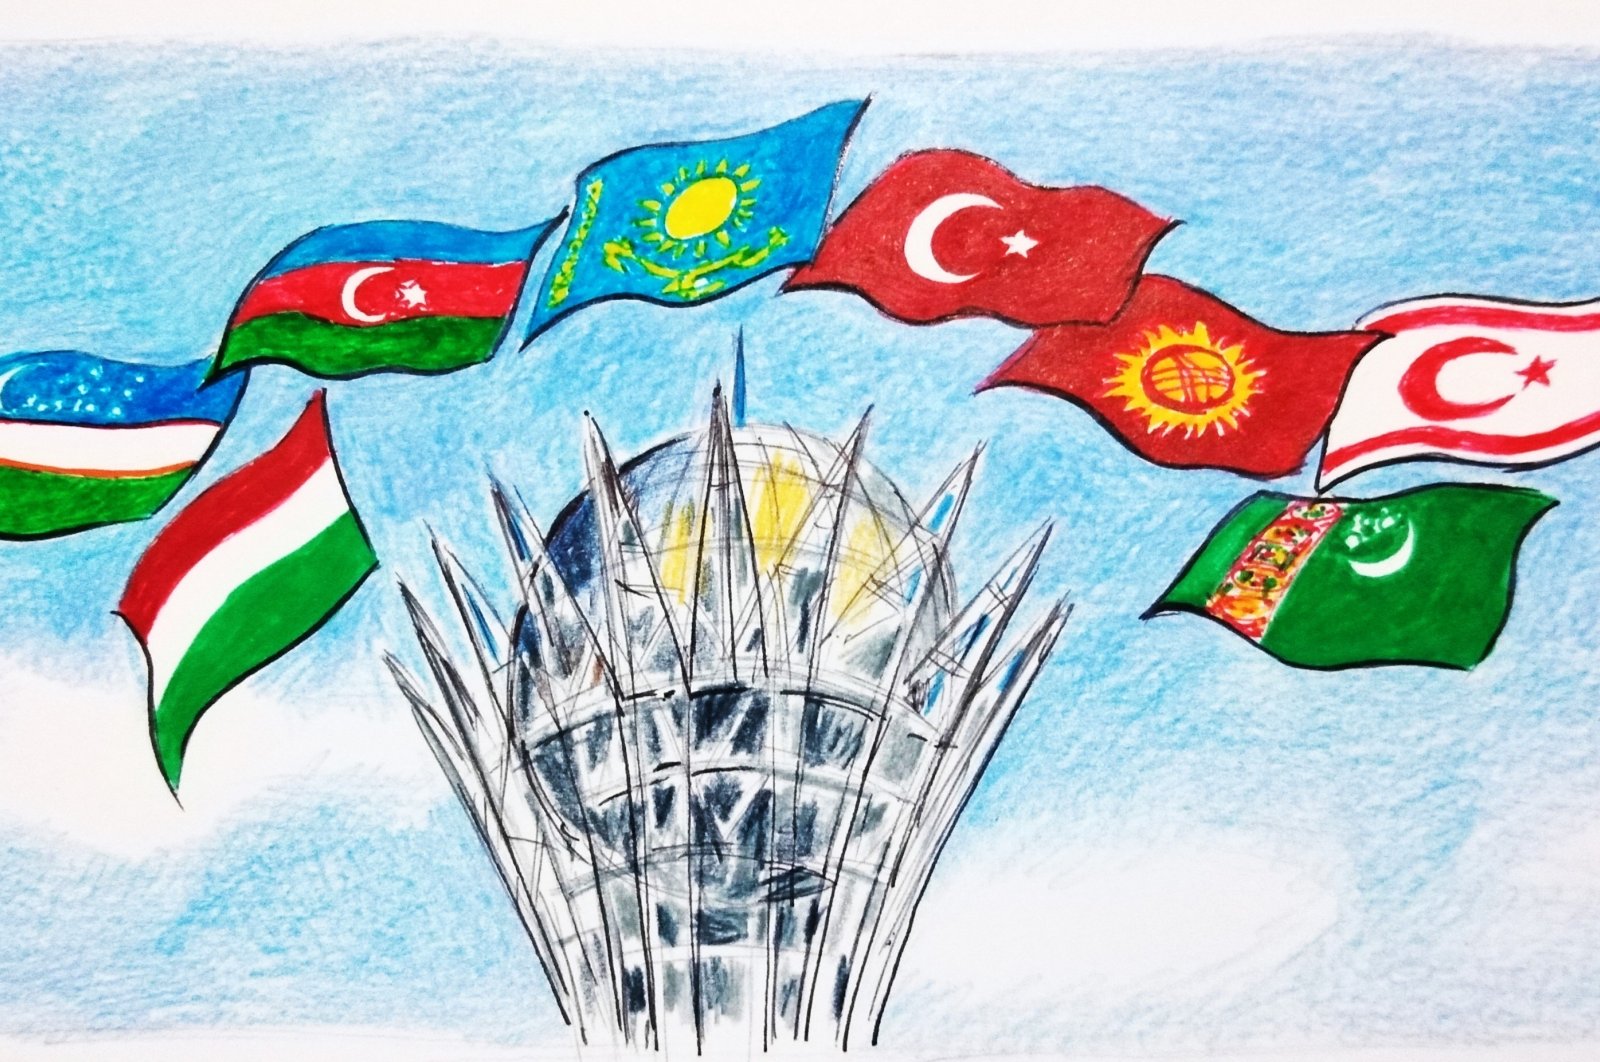 To ensure that Central Asia does not become a venue for destructive competition over the next decades, Türkiye needs to focus more on its “integration” policy. (Illustration by Erhan Yalvaç)